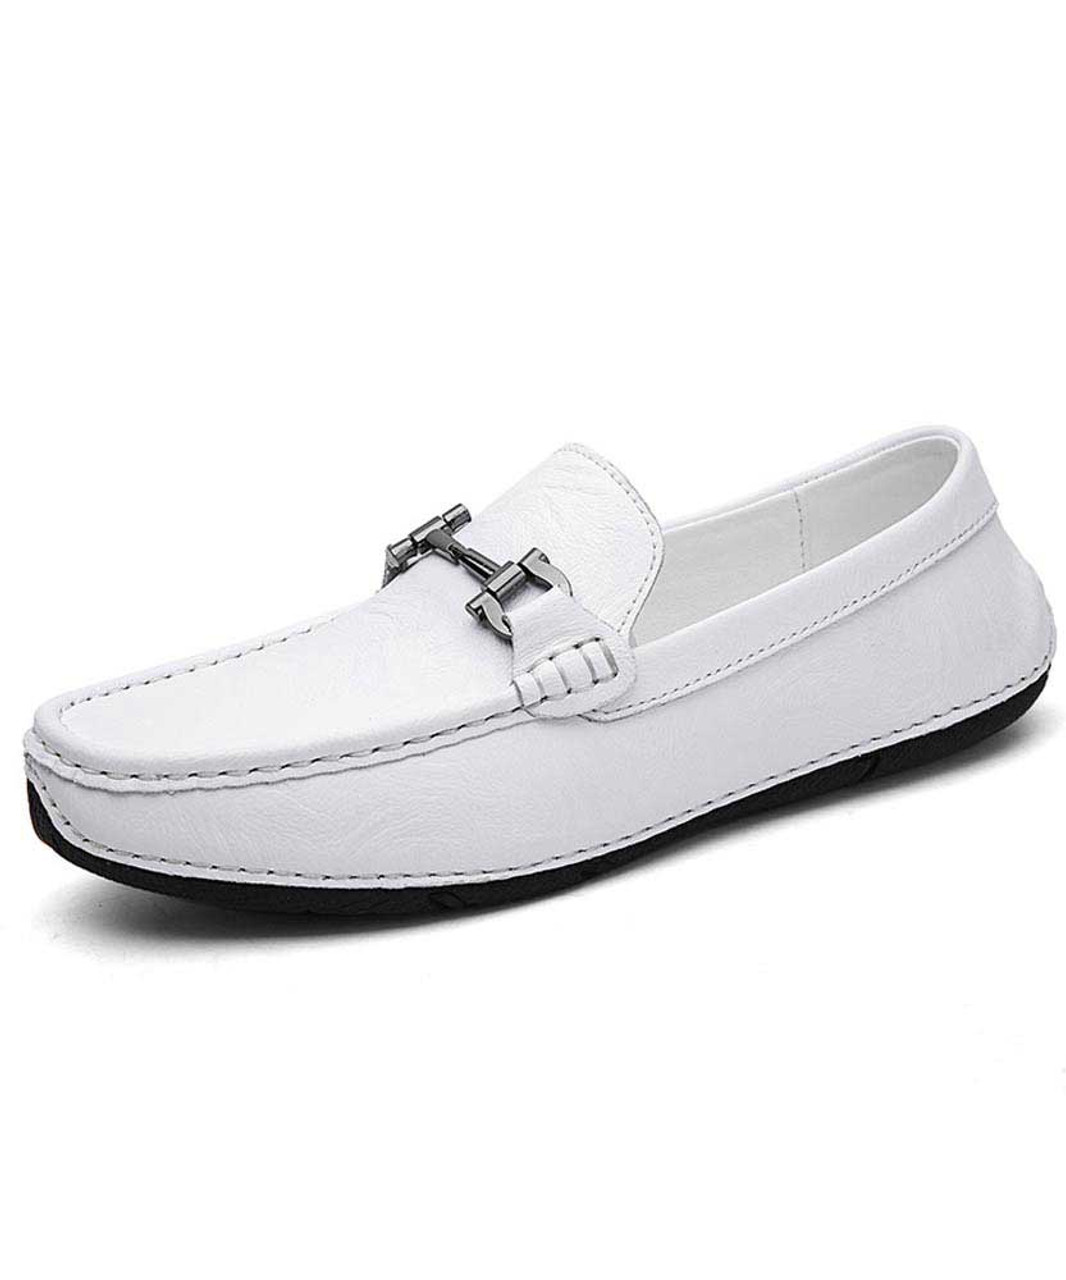 mens white leather slip on loafers